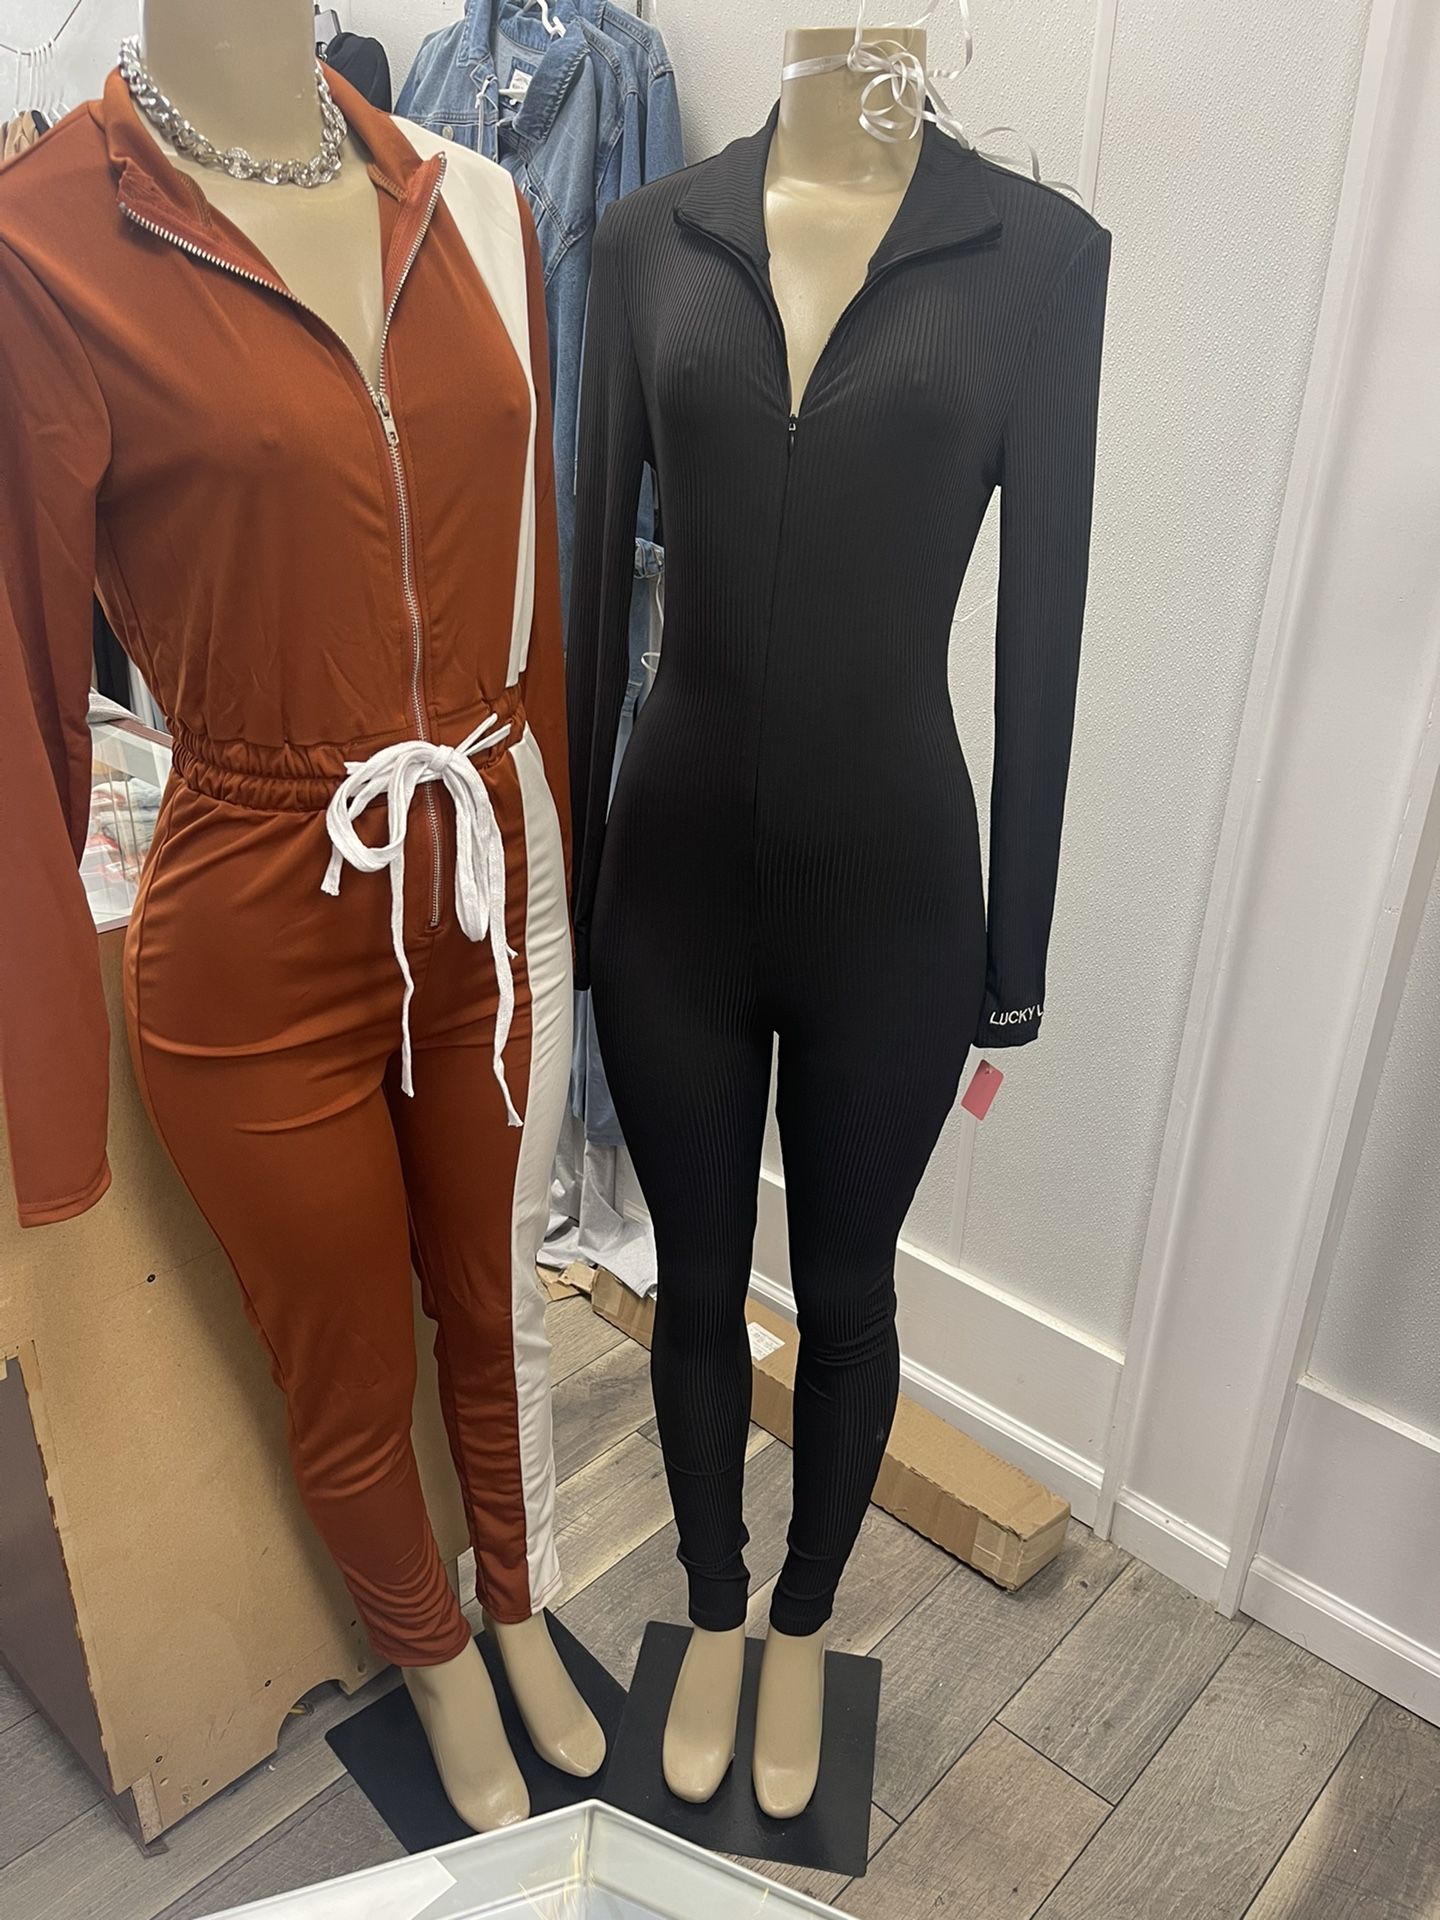 women’s one piece jumpers $30.00 each sizes small, medium 